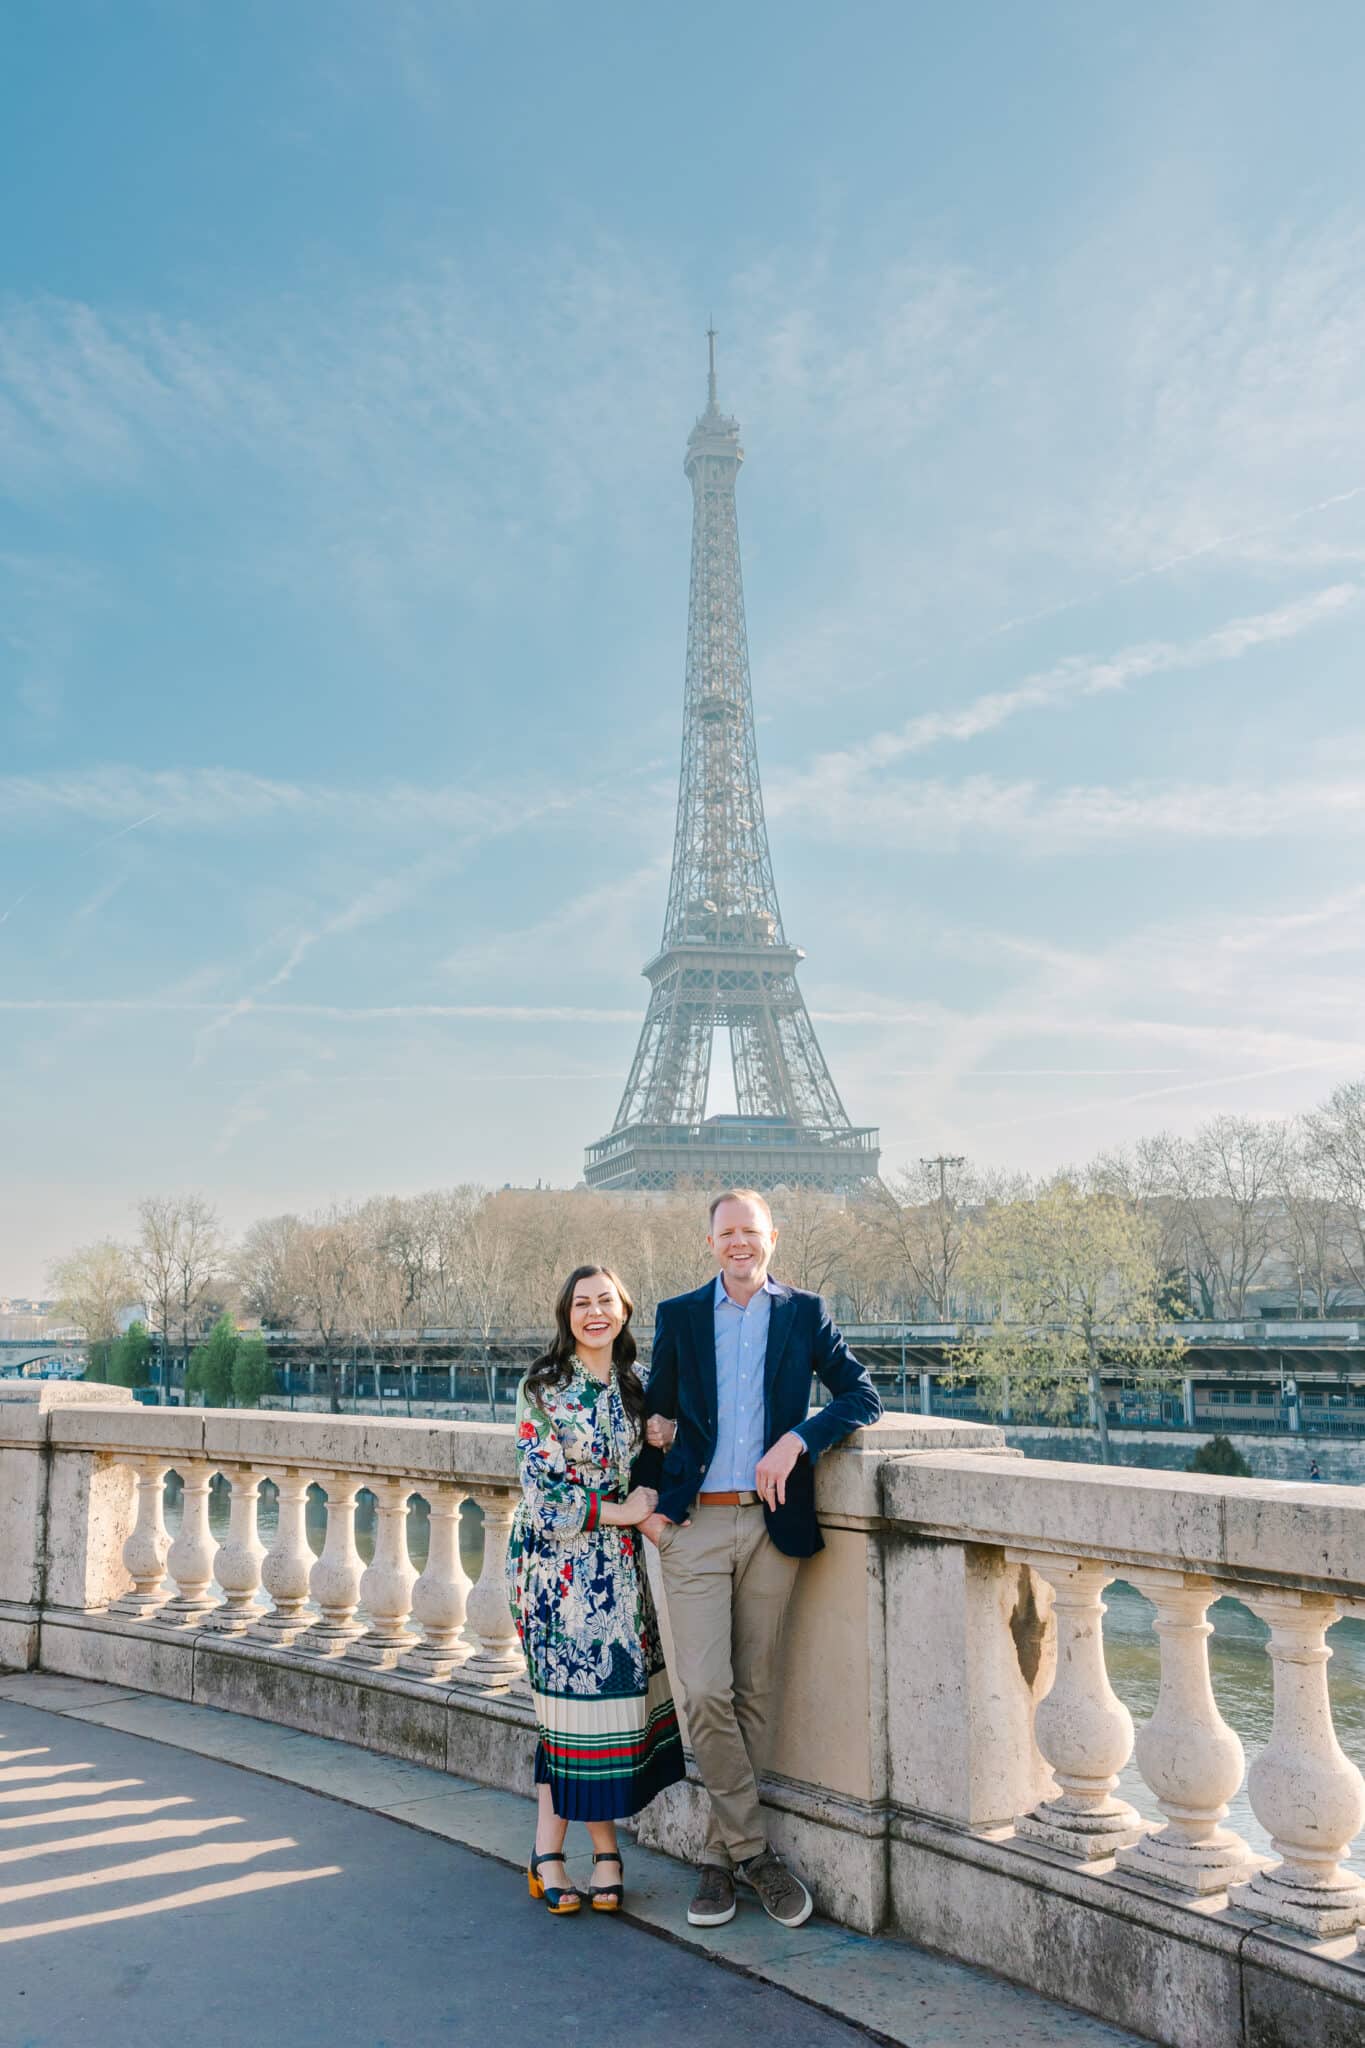 Flytographer photo shoot in Paris with a couple smiling in front of the Eiffel Tower. 